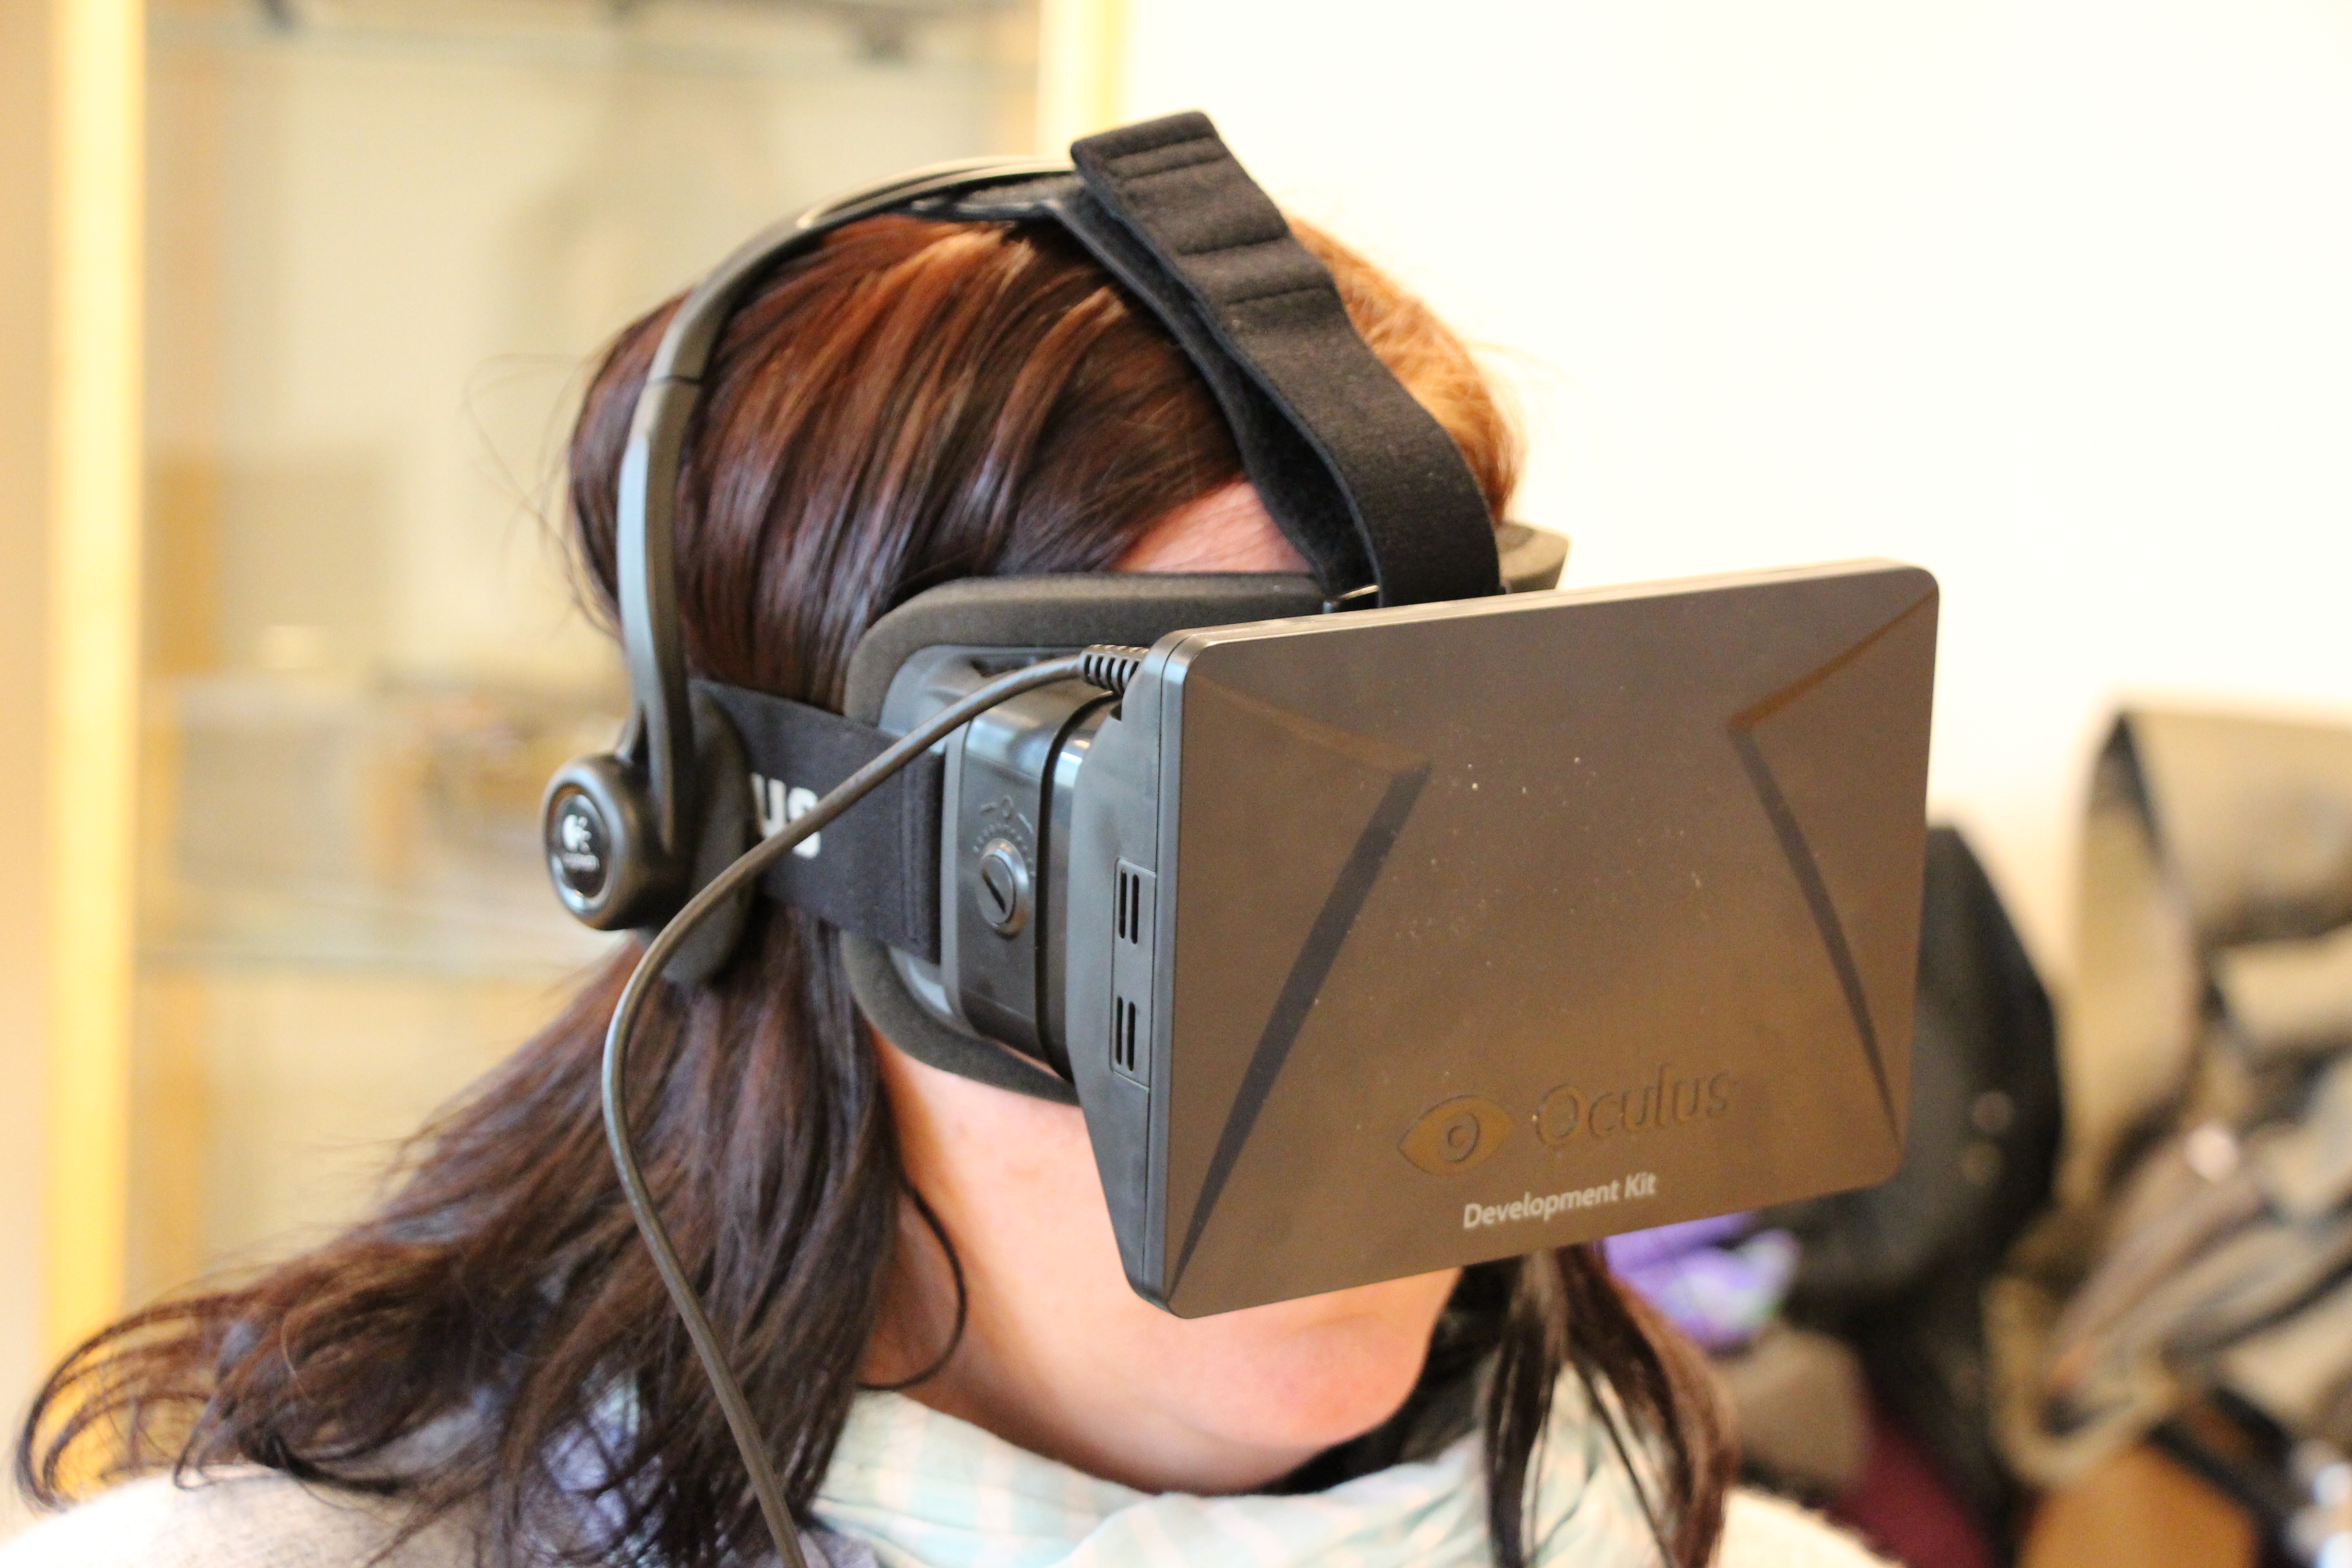 Oculus Rift brings a whole new dimension to communication